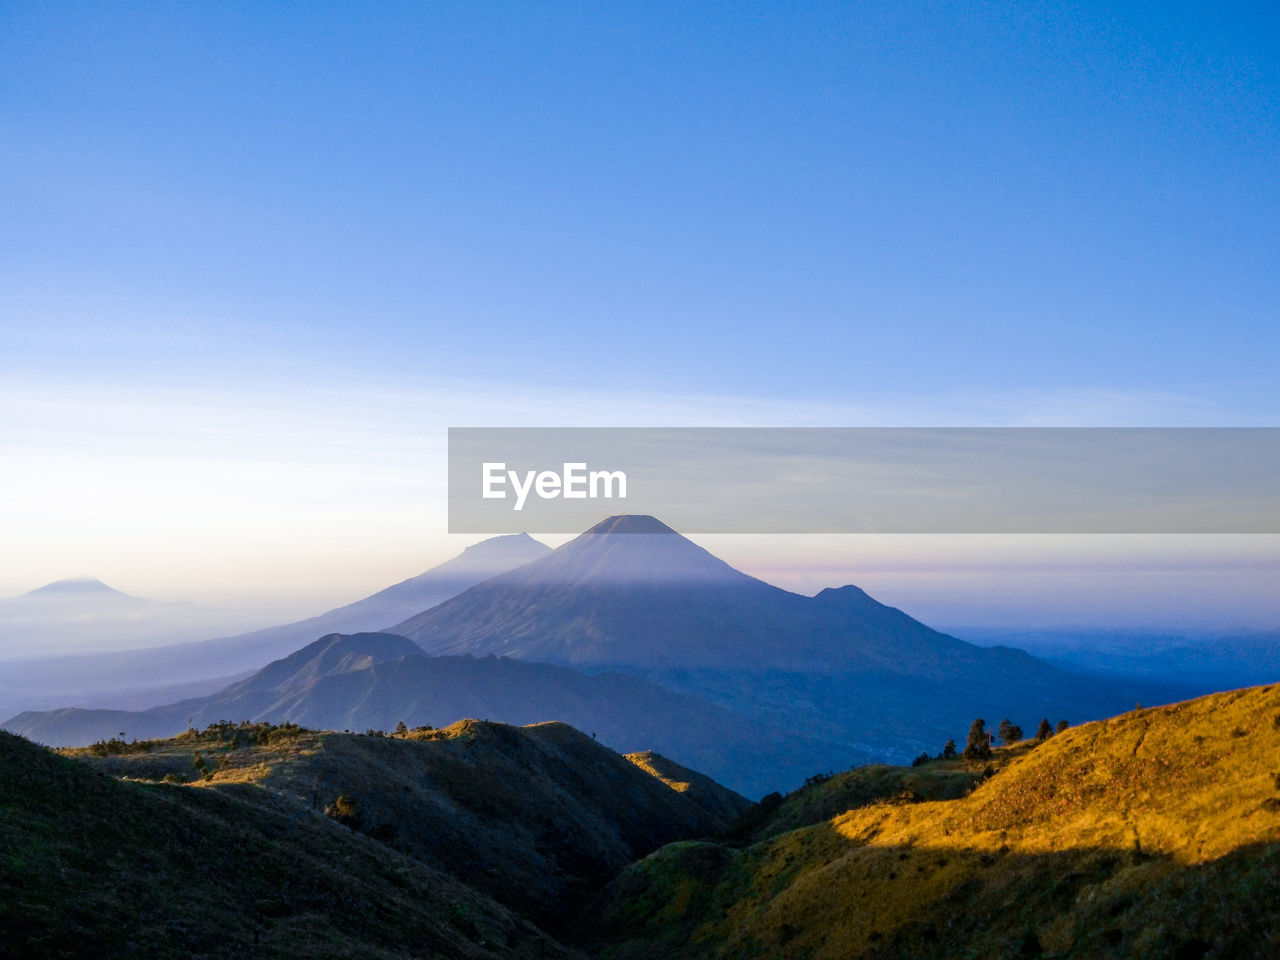 Sinoro sumbing can be seen from the top of mount prau wonosobo, dieng, central java